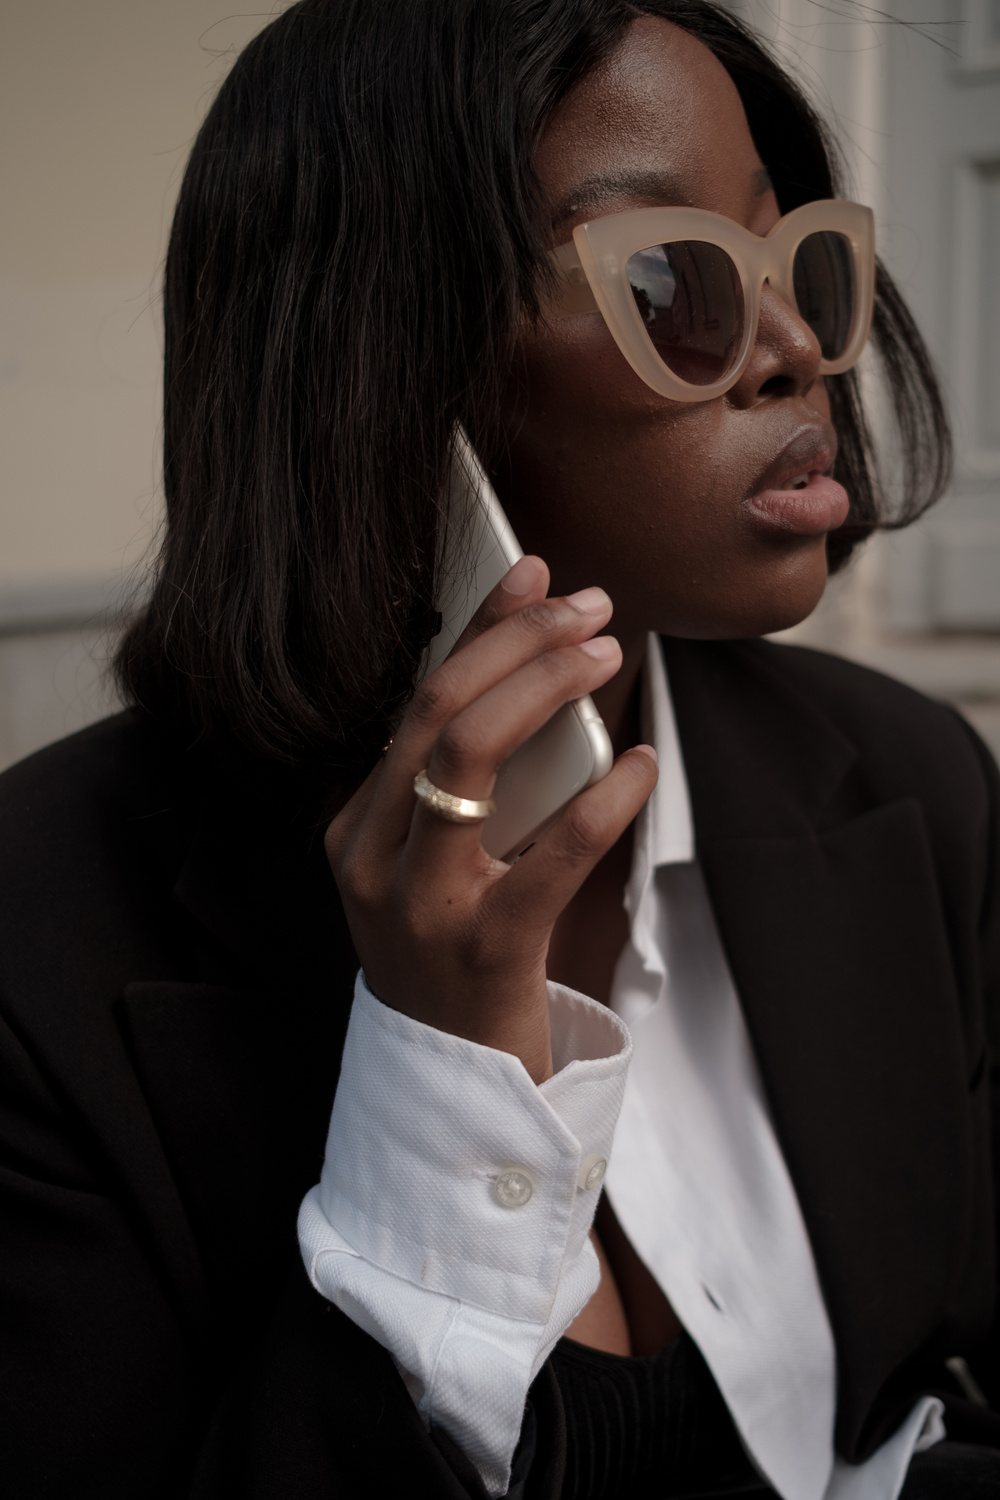 Woman in Business Outfit Talking on the Phone